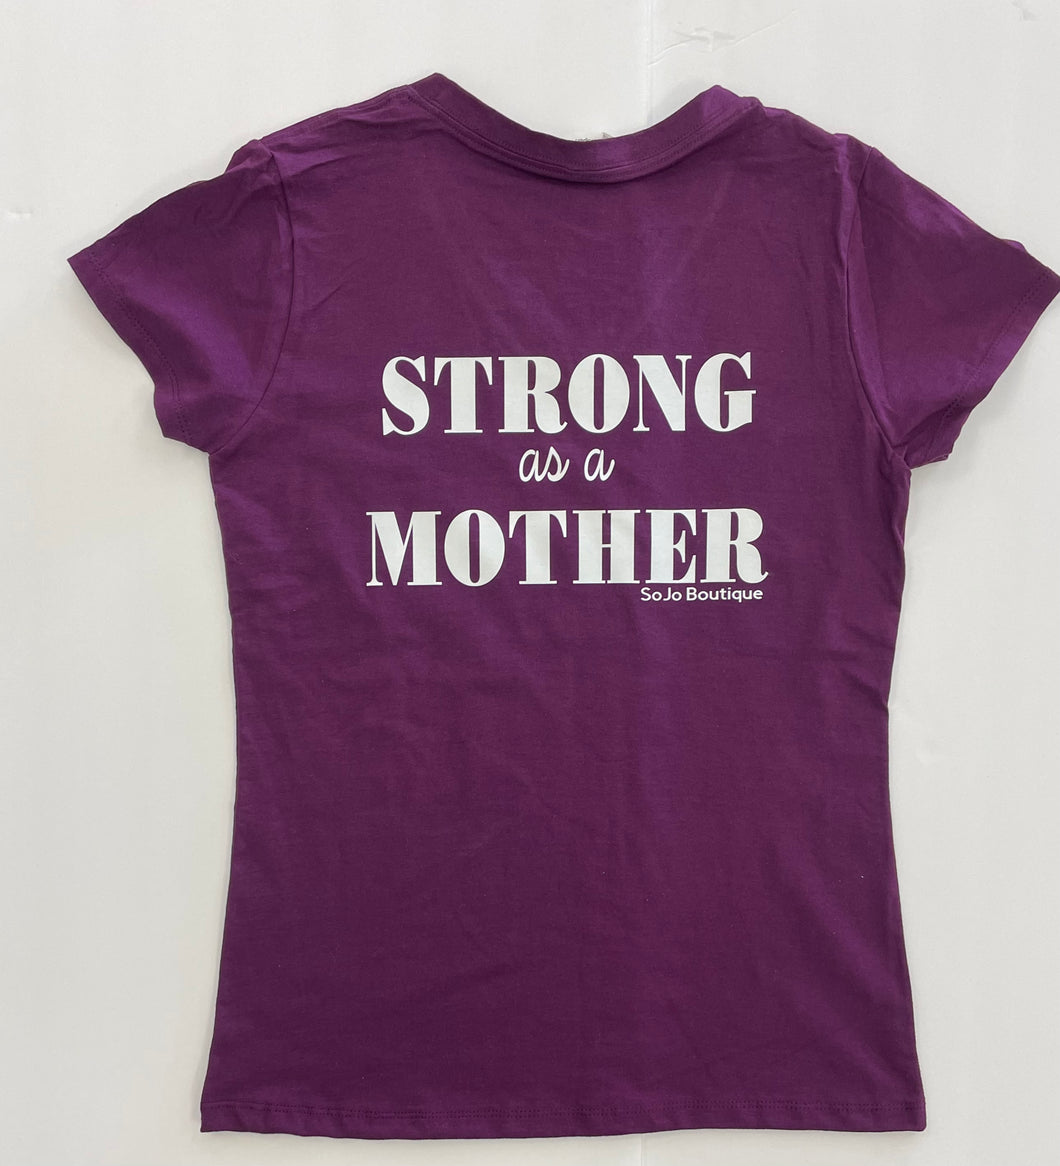 Purple cotton fitted women's t-shirt with 